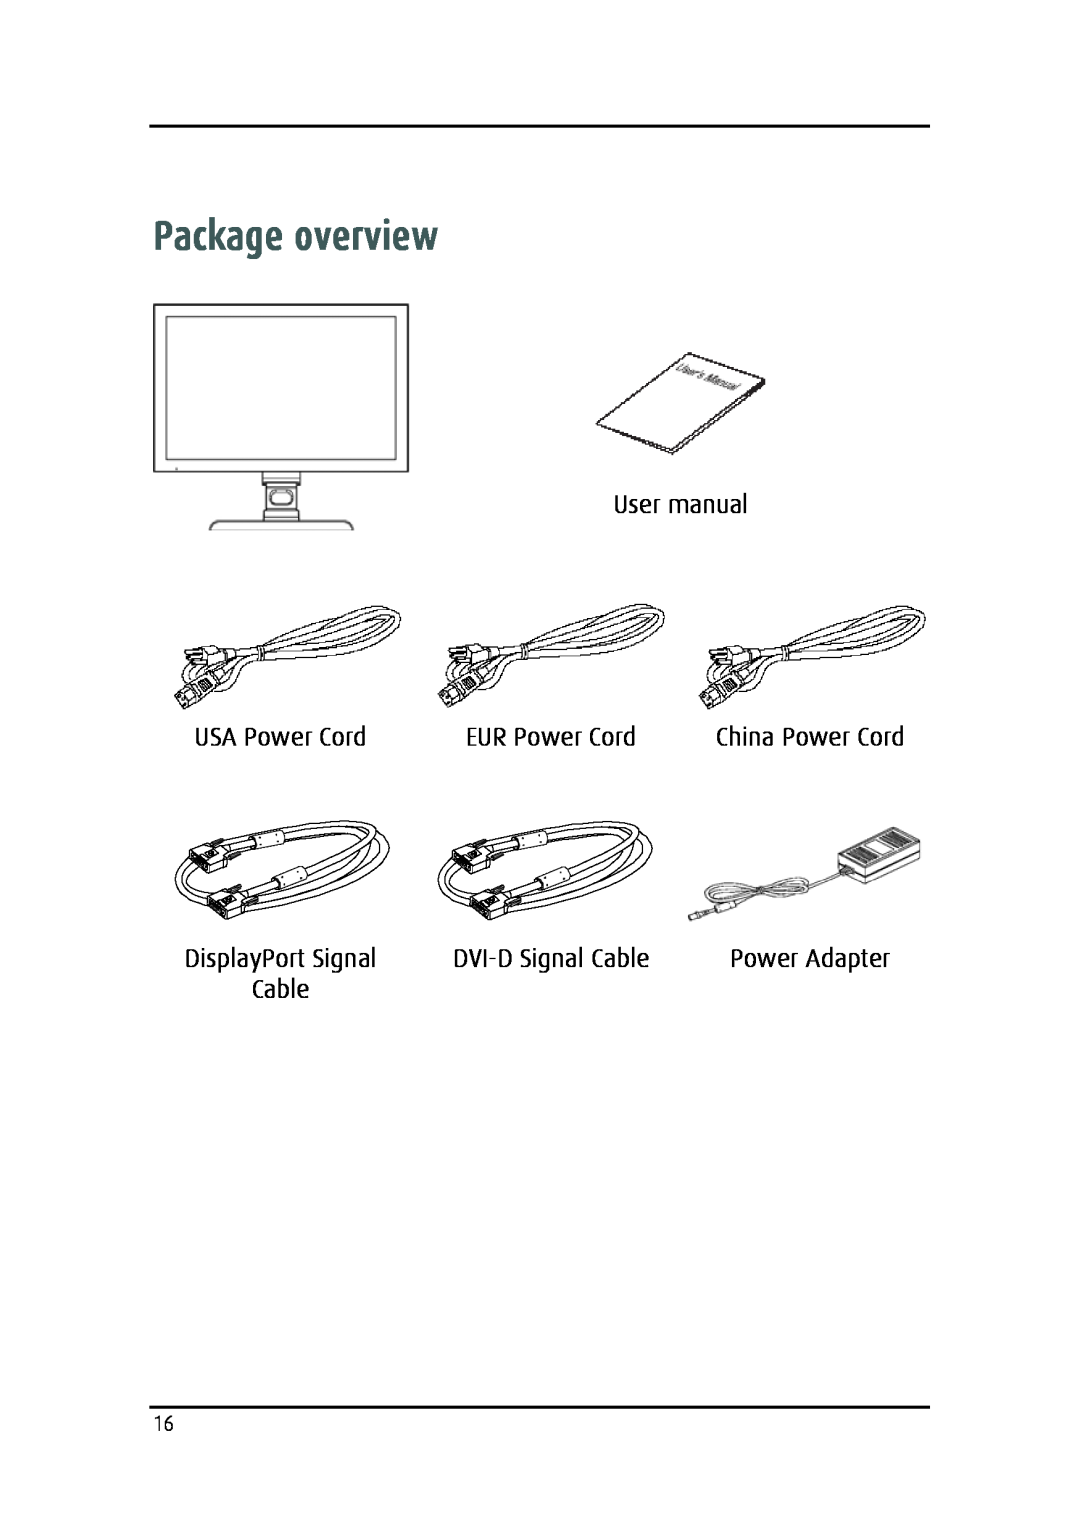 Barco MDRC-2124 user manual Package overview, User manual, USA Power Cord, EUR Power Cord, DVI-D Signal Cable 